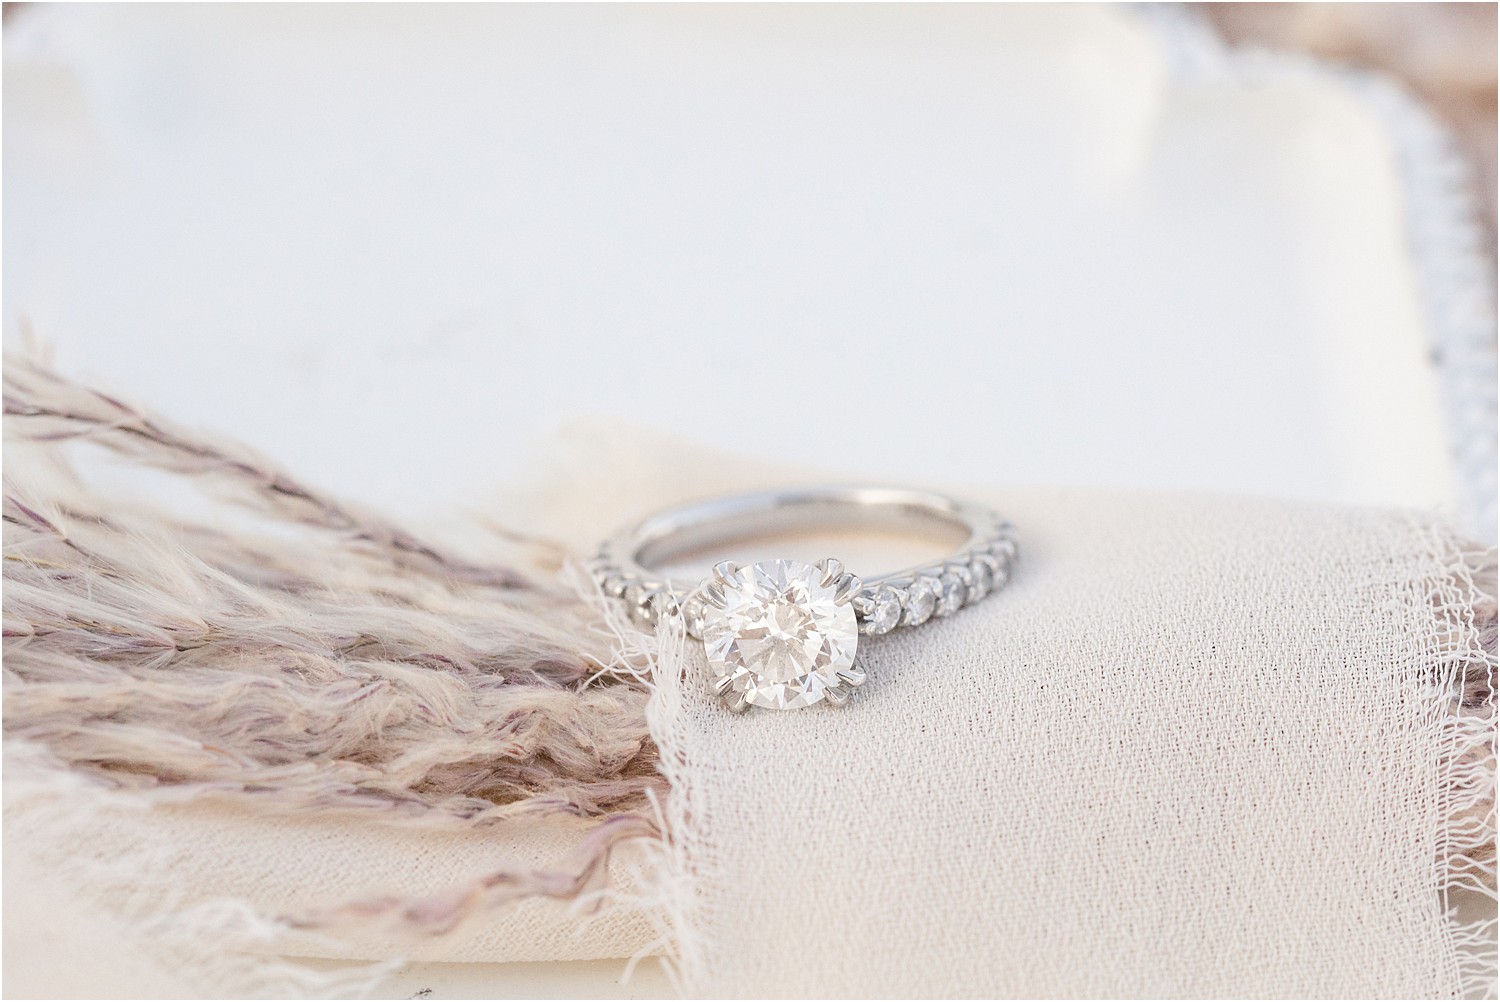 Engagement ring from Belmar Marina + Beach Engagement Session